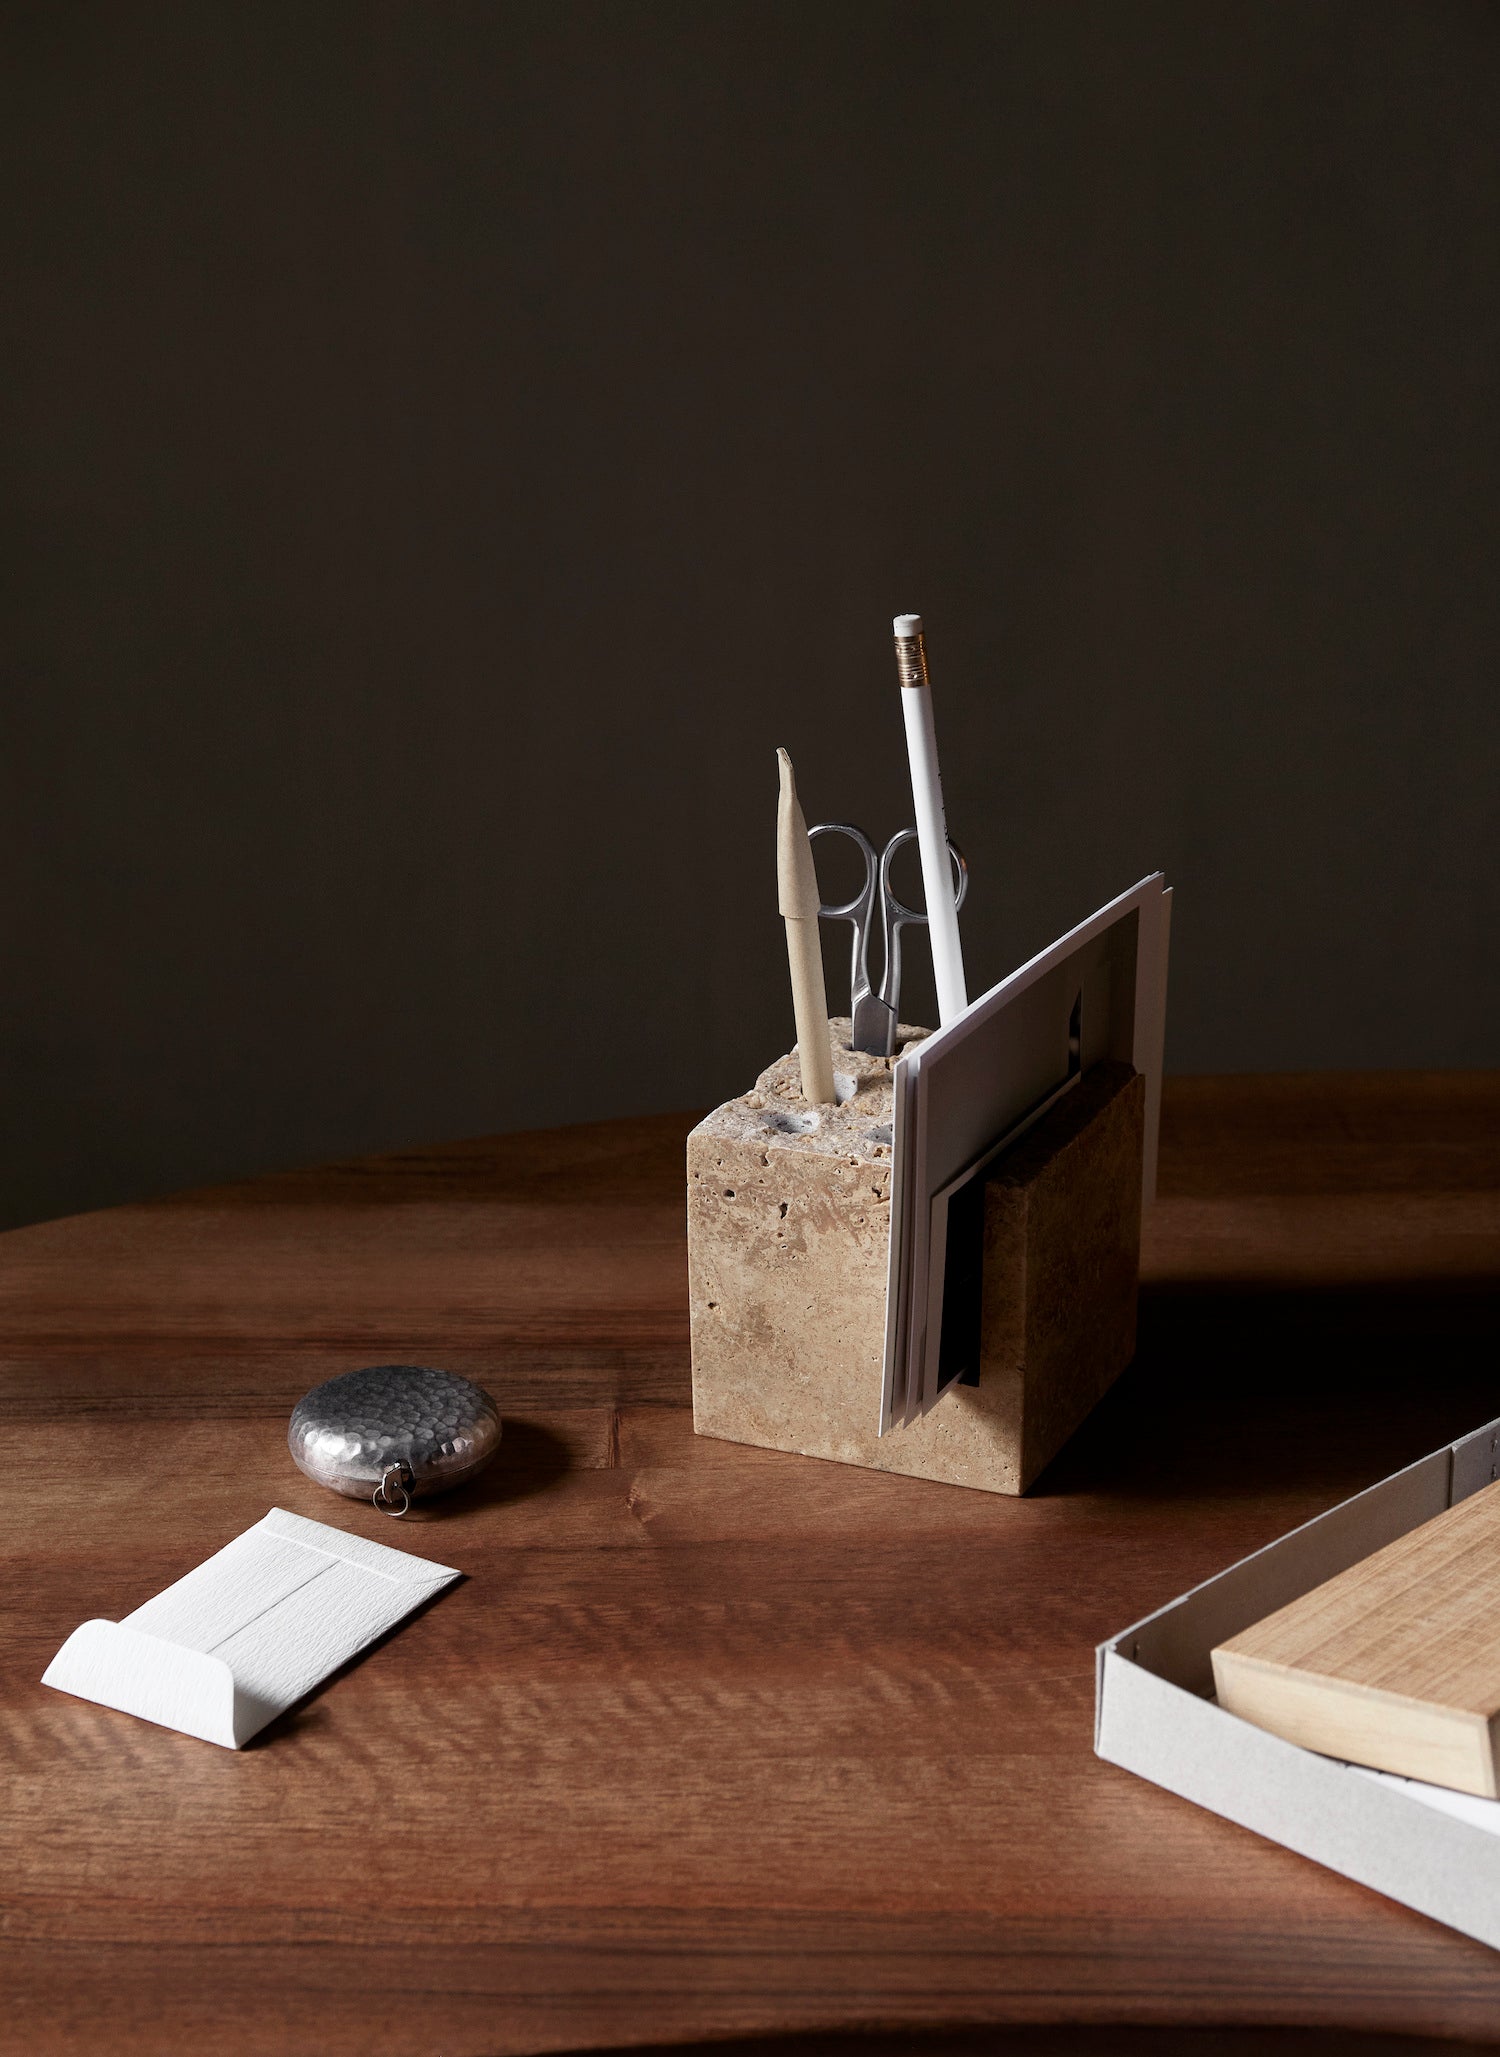 Klint Pencil Holder. An elevated, sculptural pencil holder made entirely from travertine stone with a rough, unpolished surface.